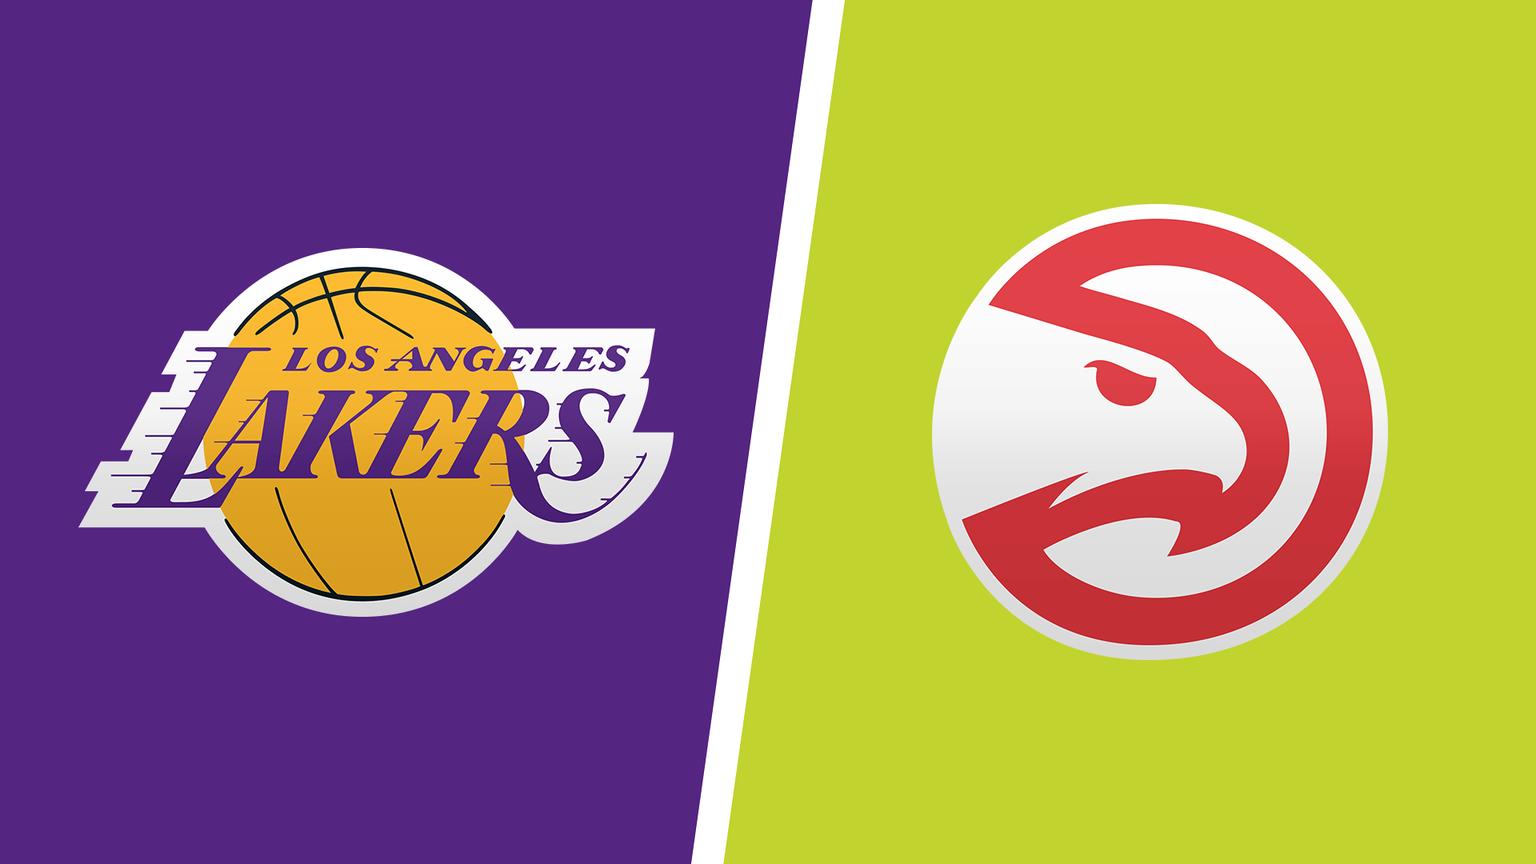 How to Watch Atlanta Hawks vs. Los Angeles Lakers Game Live Online on